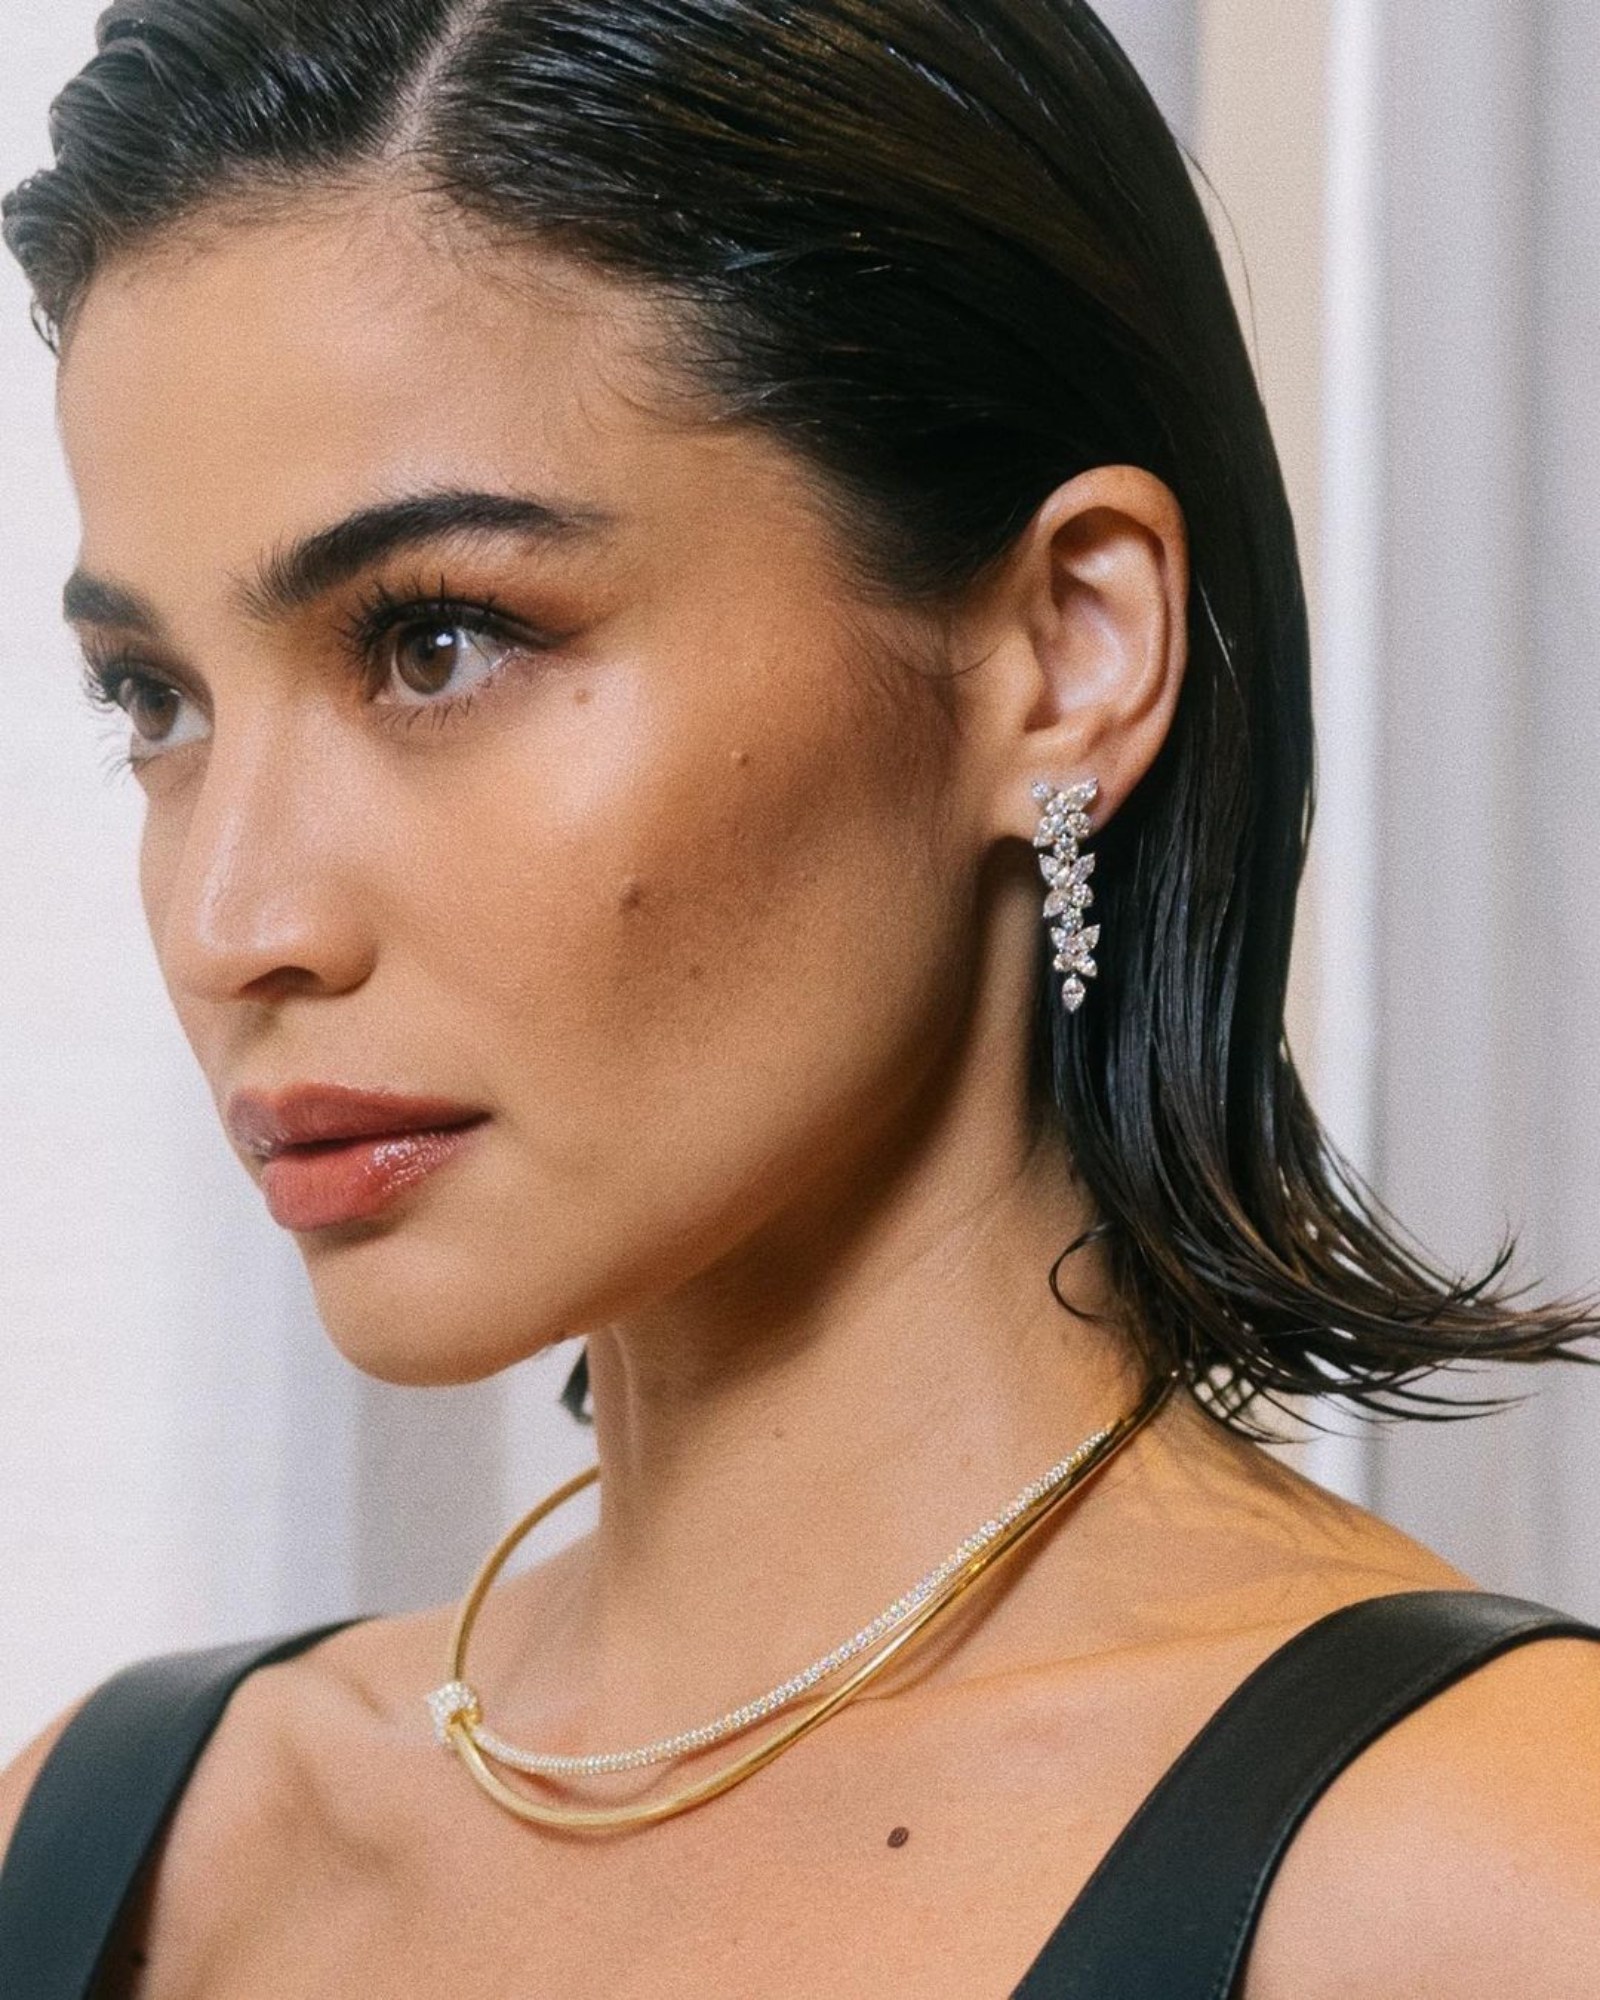 Anne Curtis at the Tiffany & Co. opening party in New York